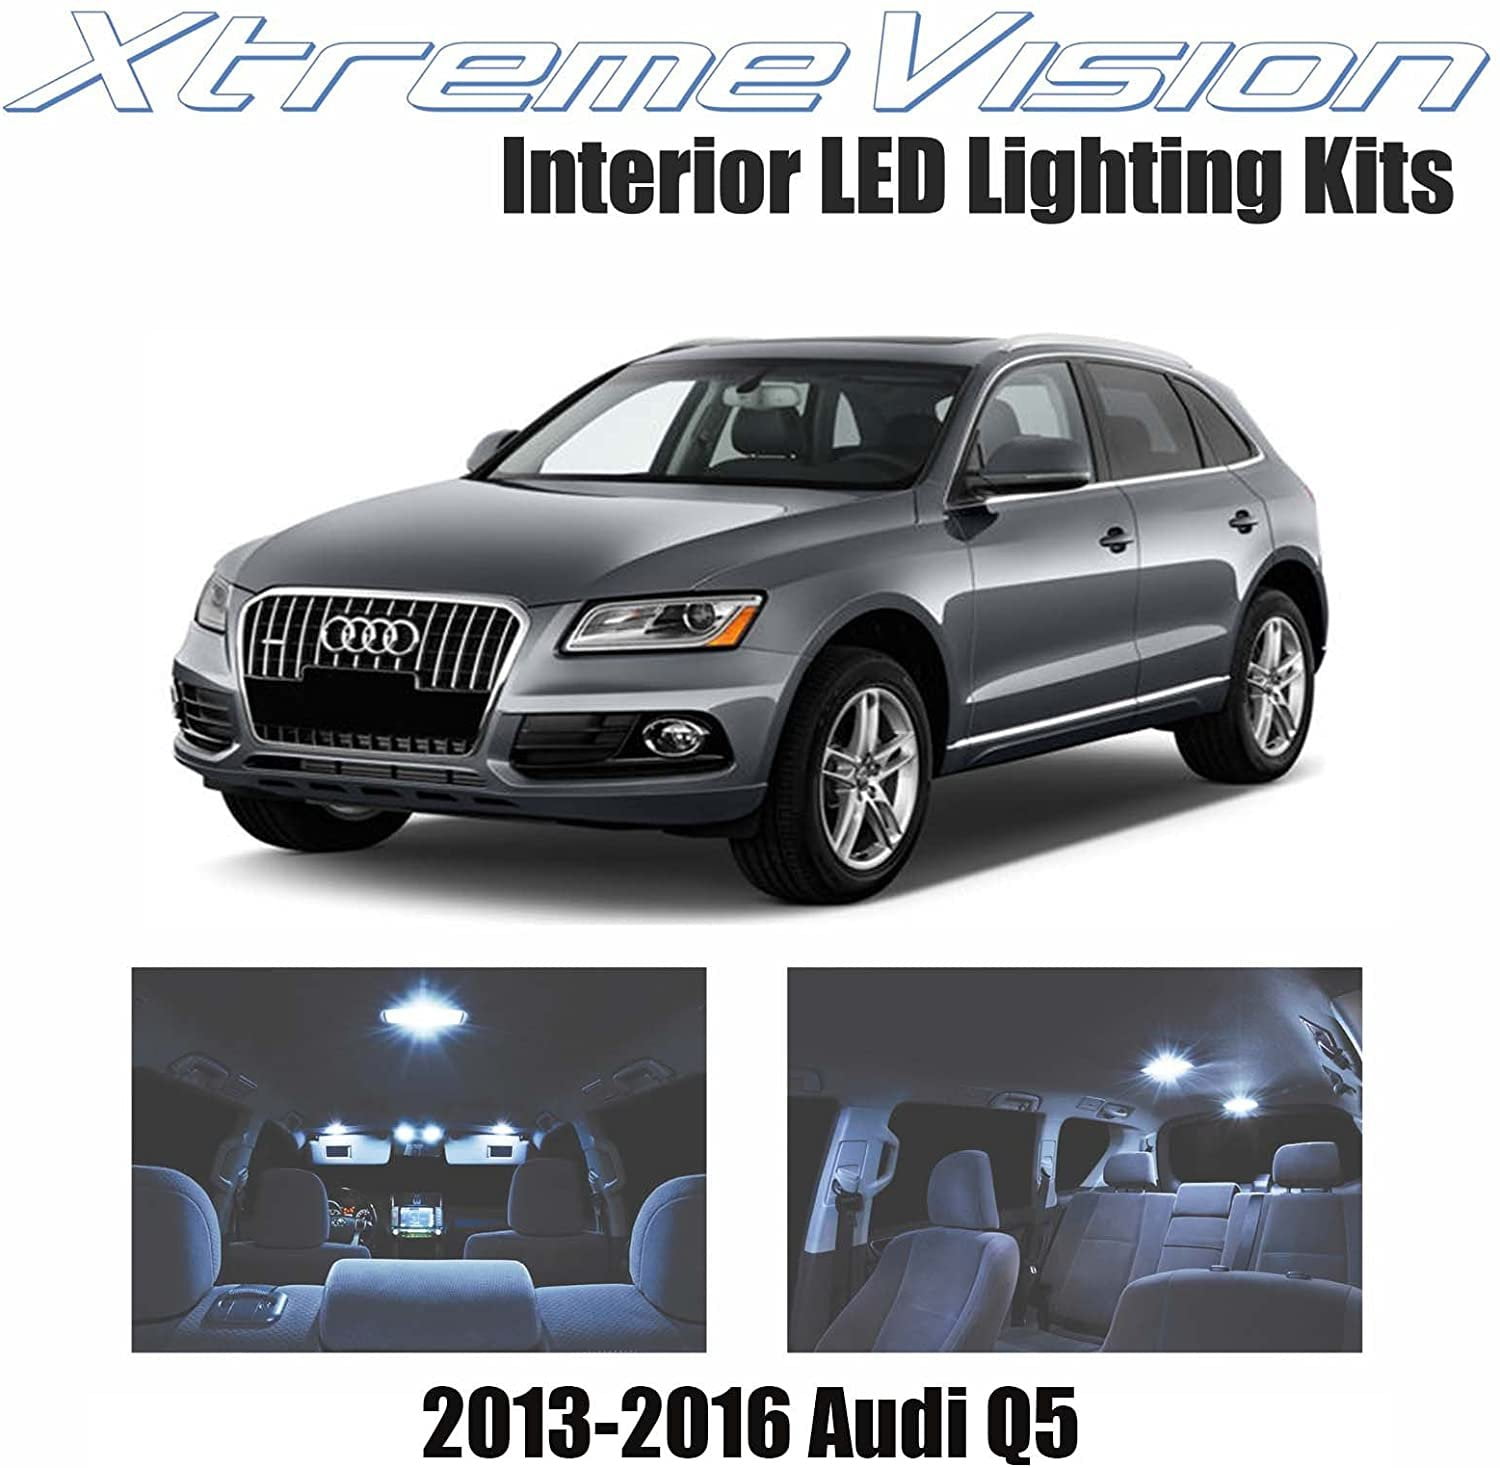 Mince profil genopfyldning XtremeVision LED for Audi Q5 2013-2016 12 Pieces Cool White Premium  Interior LED Kit Package + Installation Tool - Walmart.com